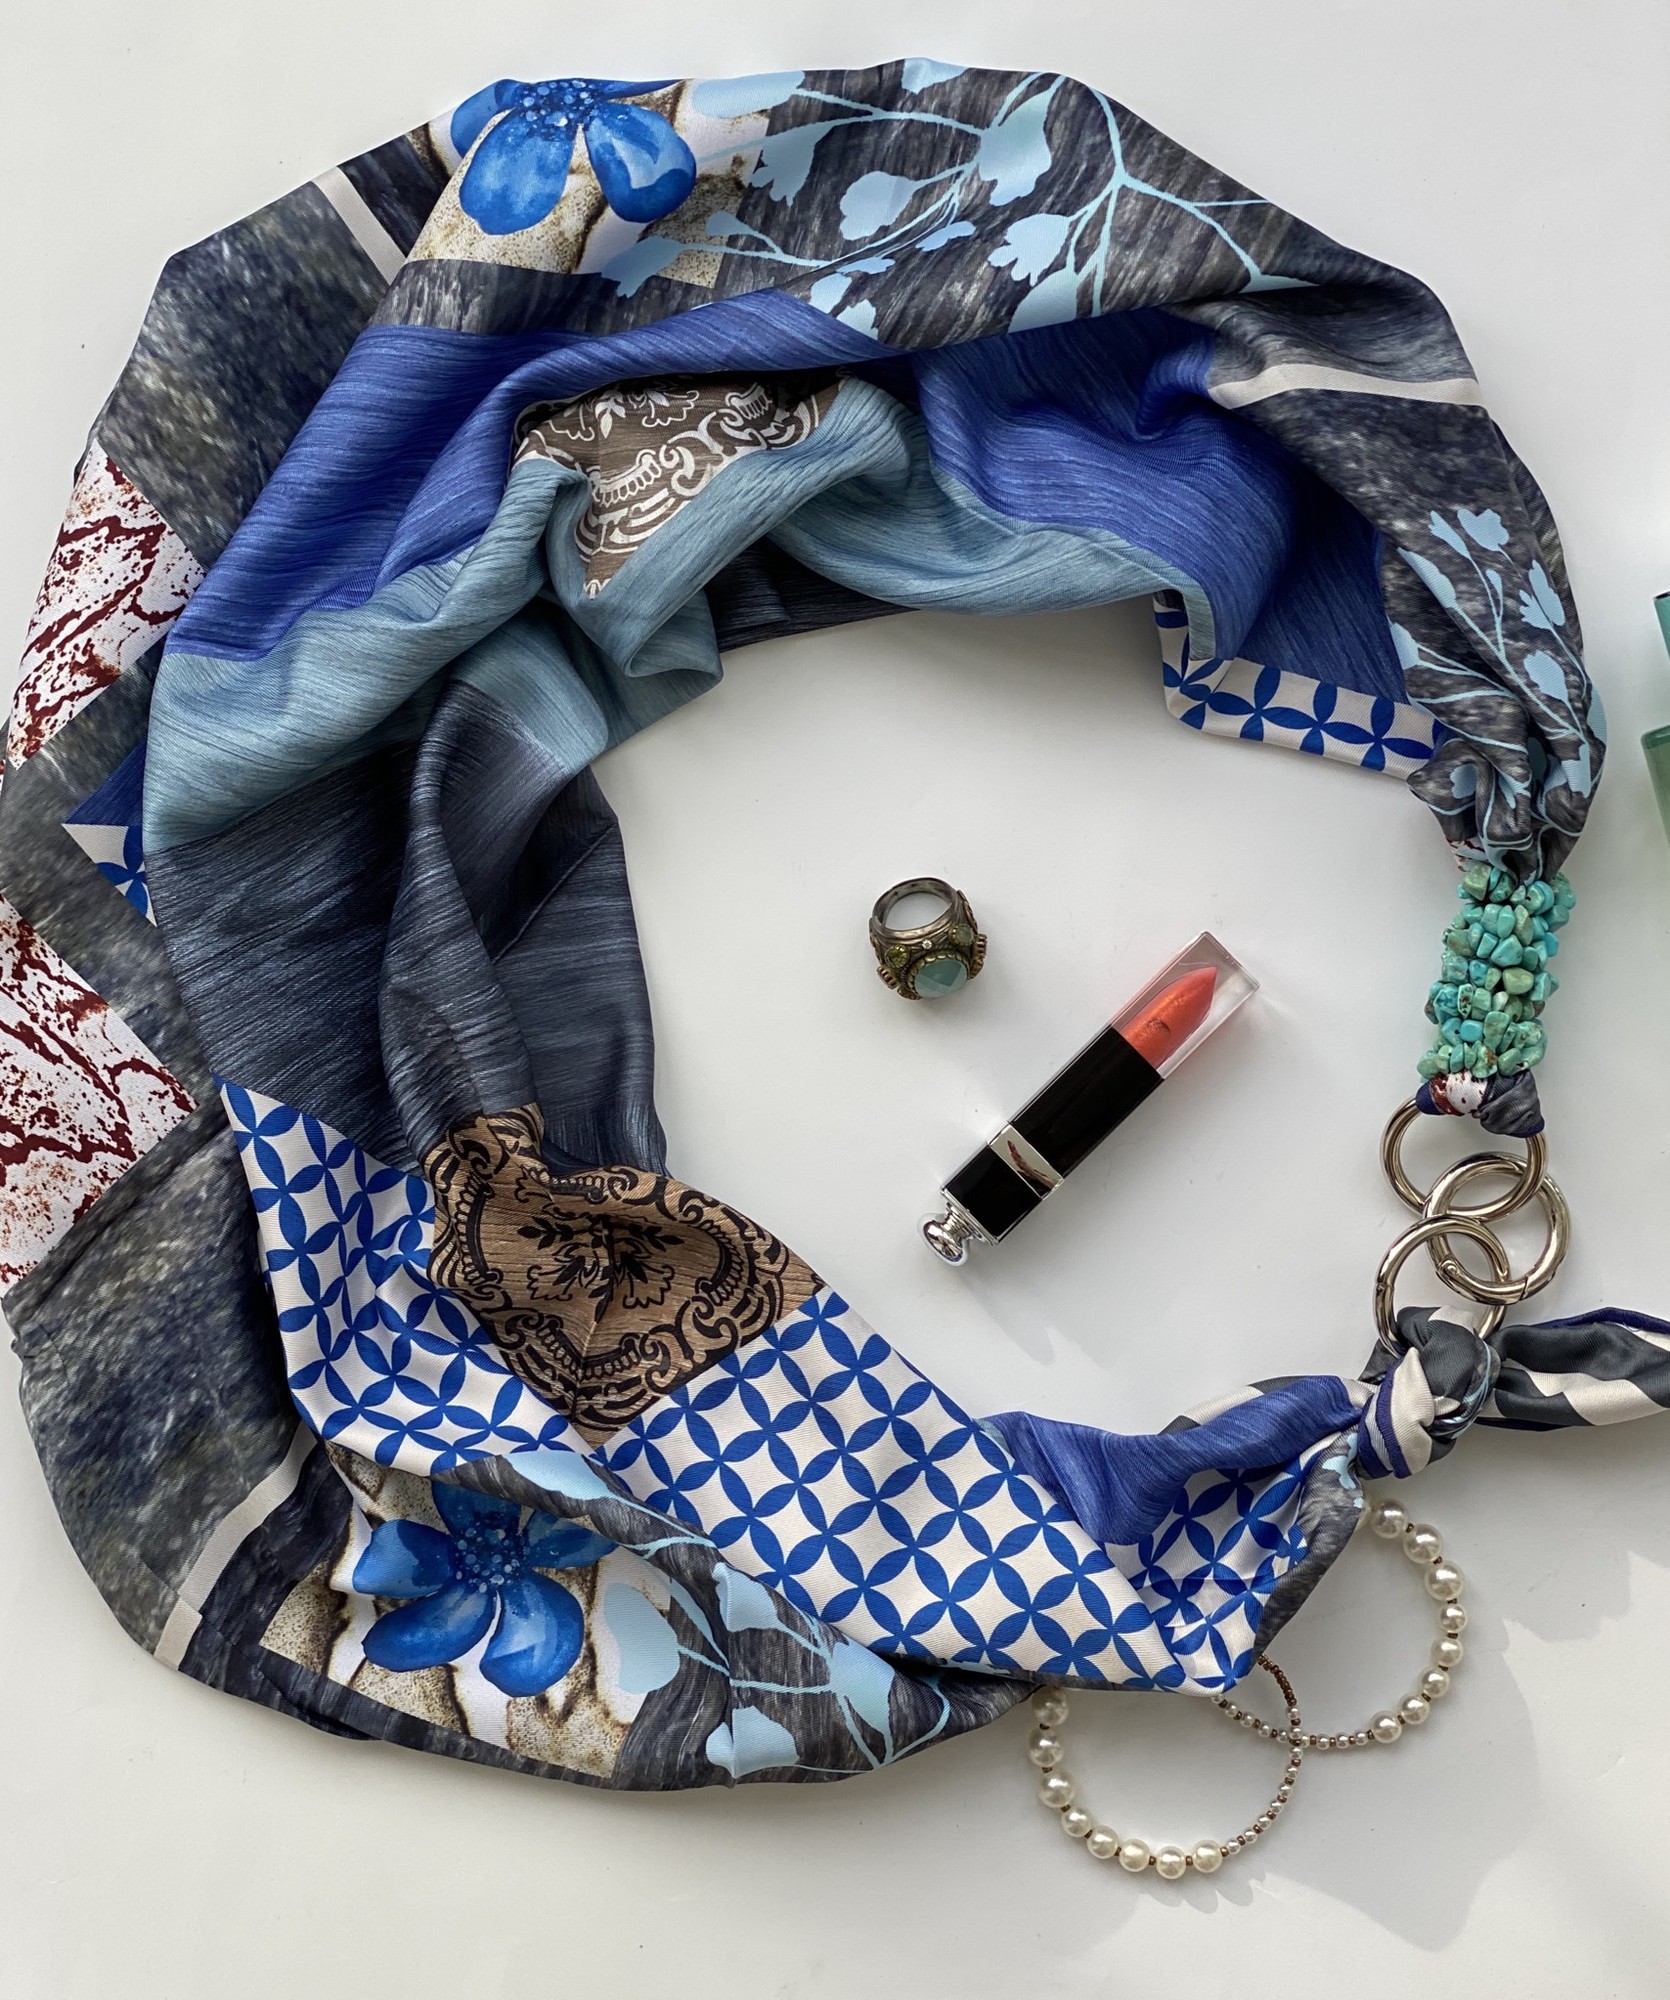 Scarf "blue ocean of love”” from the brand MyScarf. Decorated with natural rhodonite